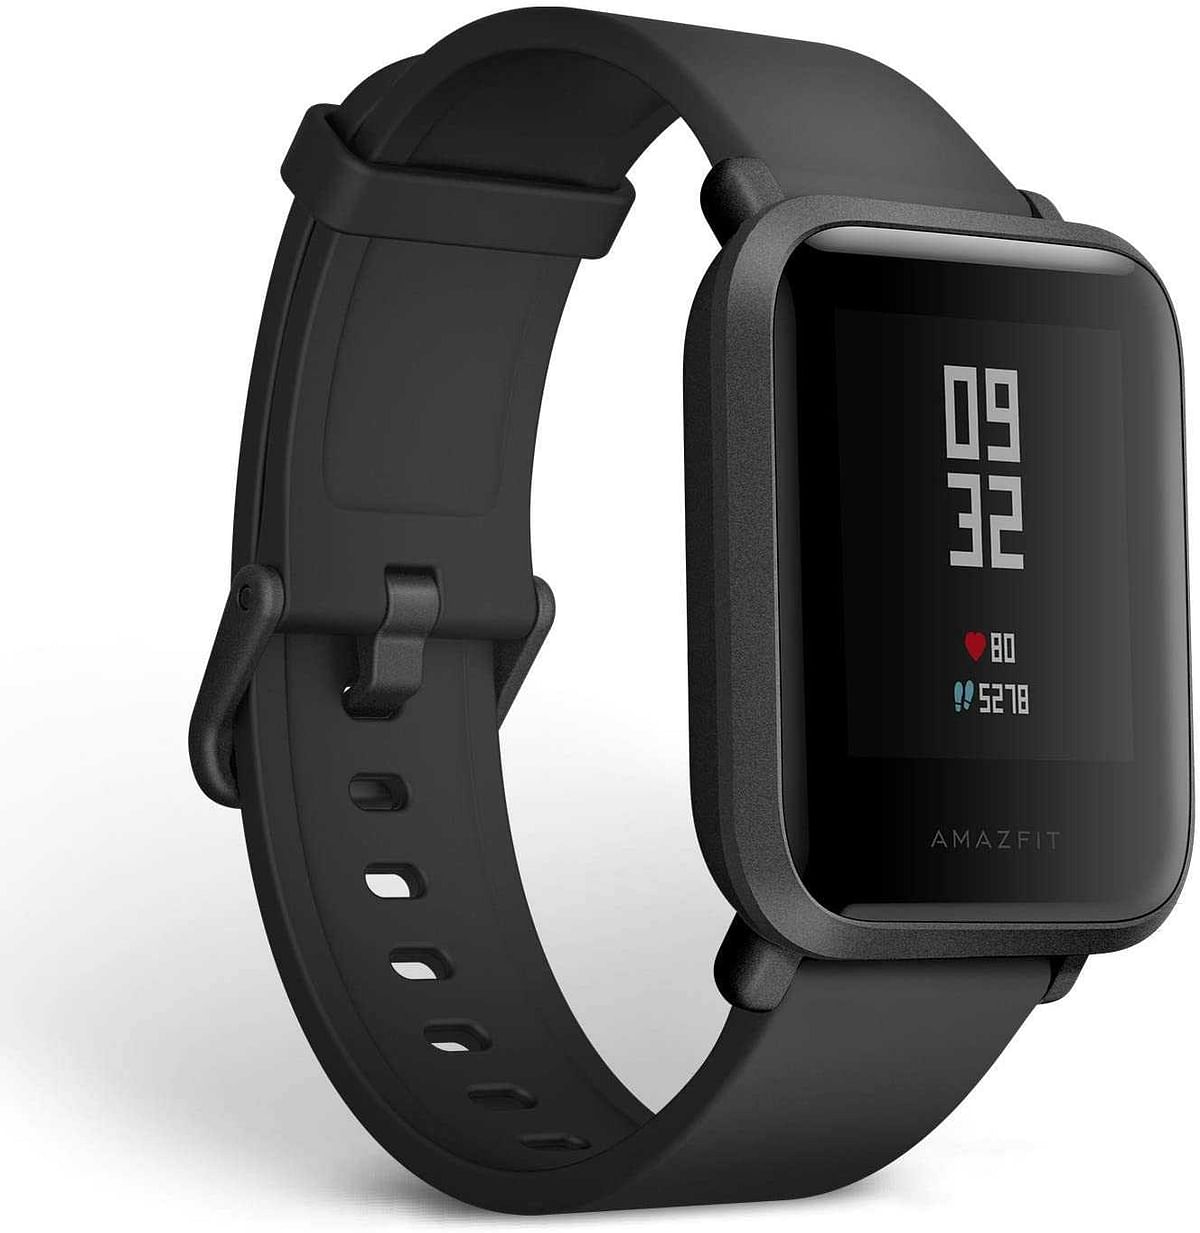 Amazfit Bip Fitness Smartwatch, All-Day Heart Rate and Activity Tracking, Sleep Monitoring, Built-In GPS, Bluetooth, Onyx Black